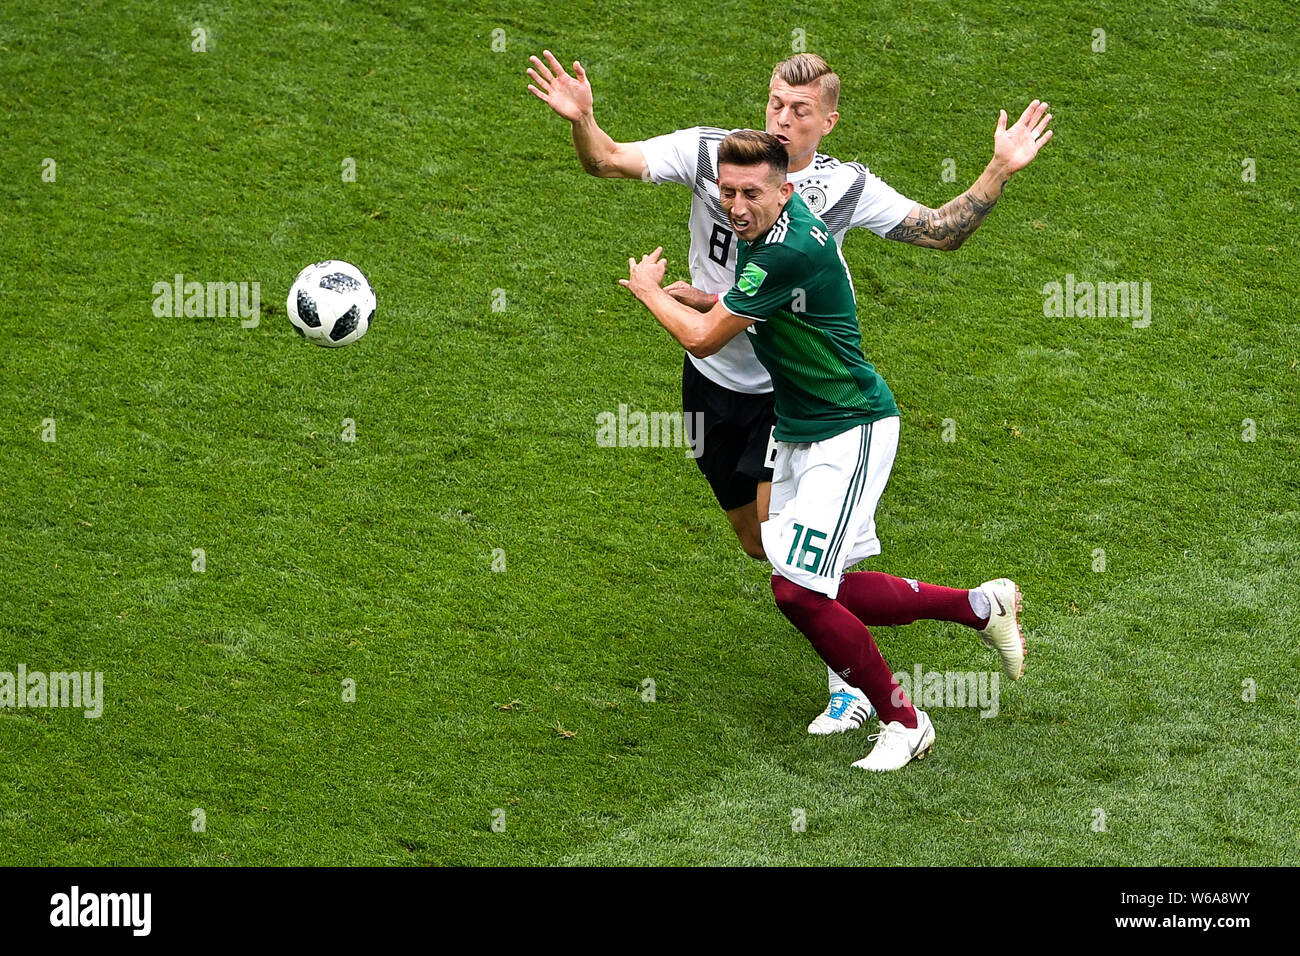 Hector Herrera of Mexico, right, challenges Toni Kroos of Germany in their Group F match during the 2018 FIFA World Cup in Moscow, Russia, 17 June 201 Stock Photo